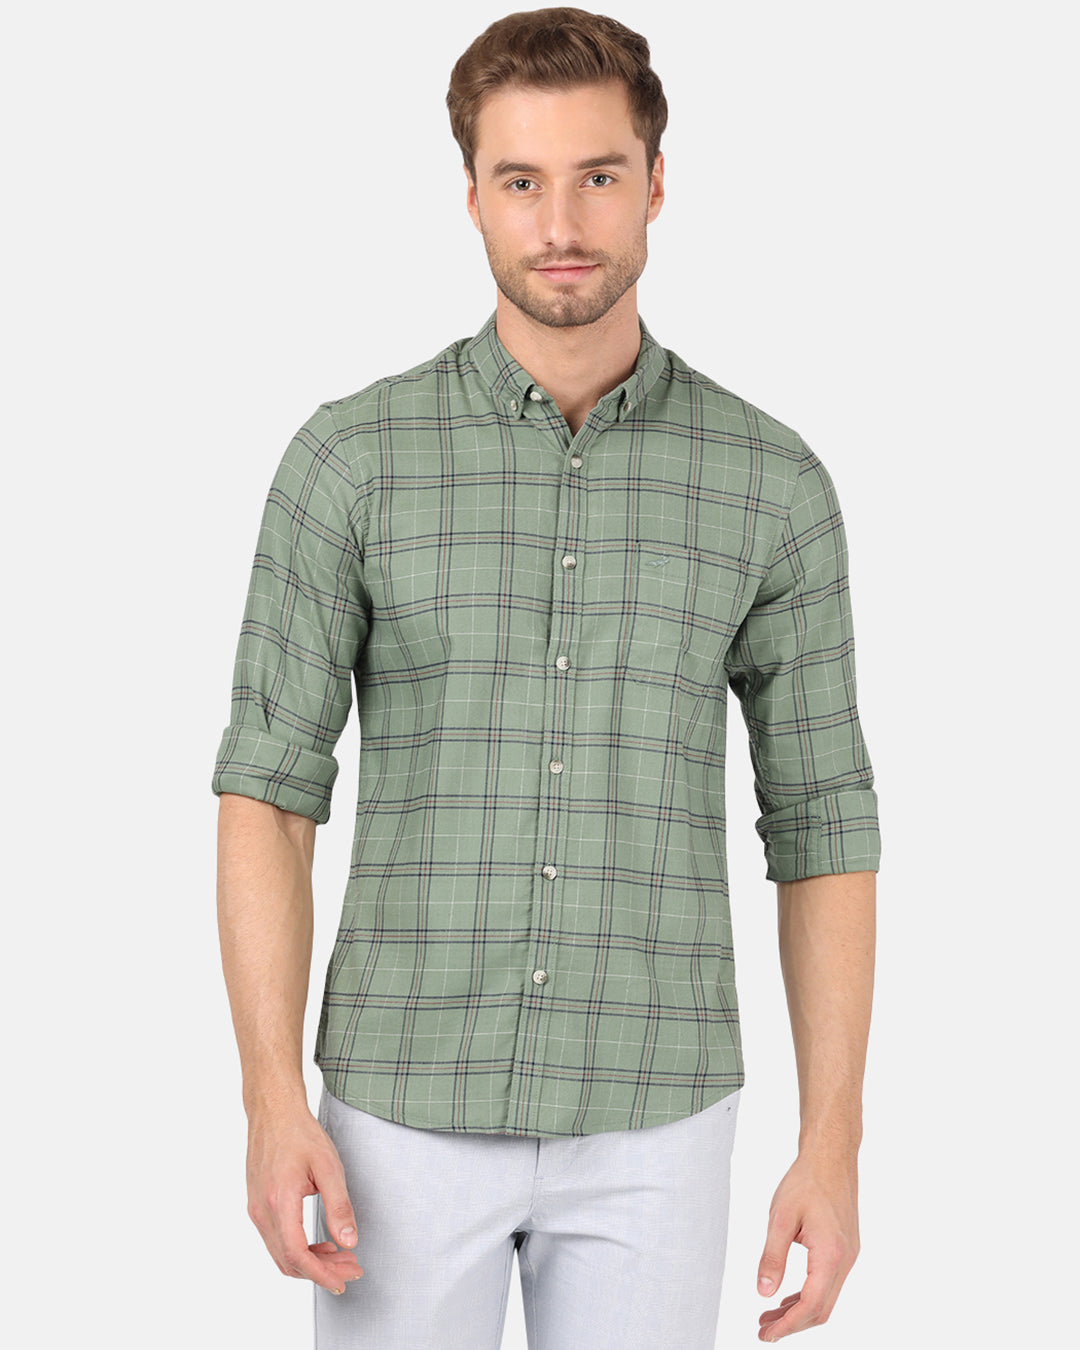 Crocodile Casual Full Sleeve Slim Fit Checks Green with Collar Shirt for Men